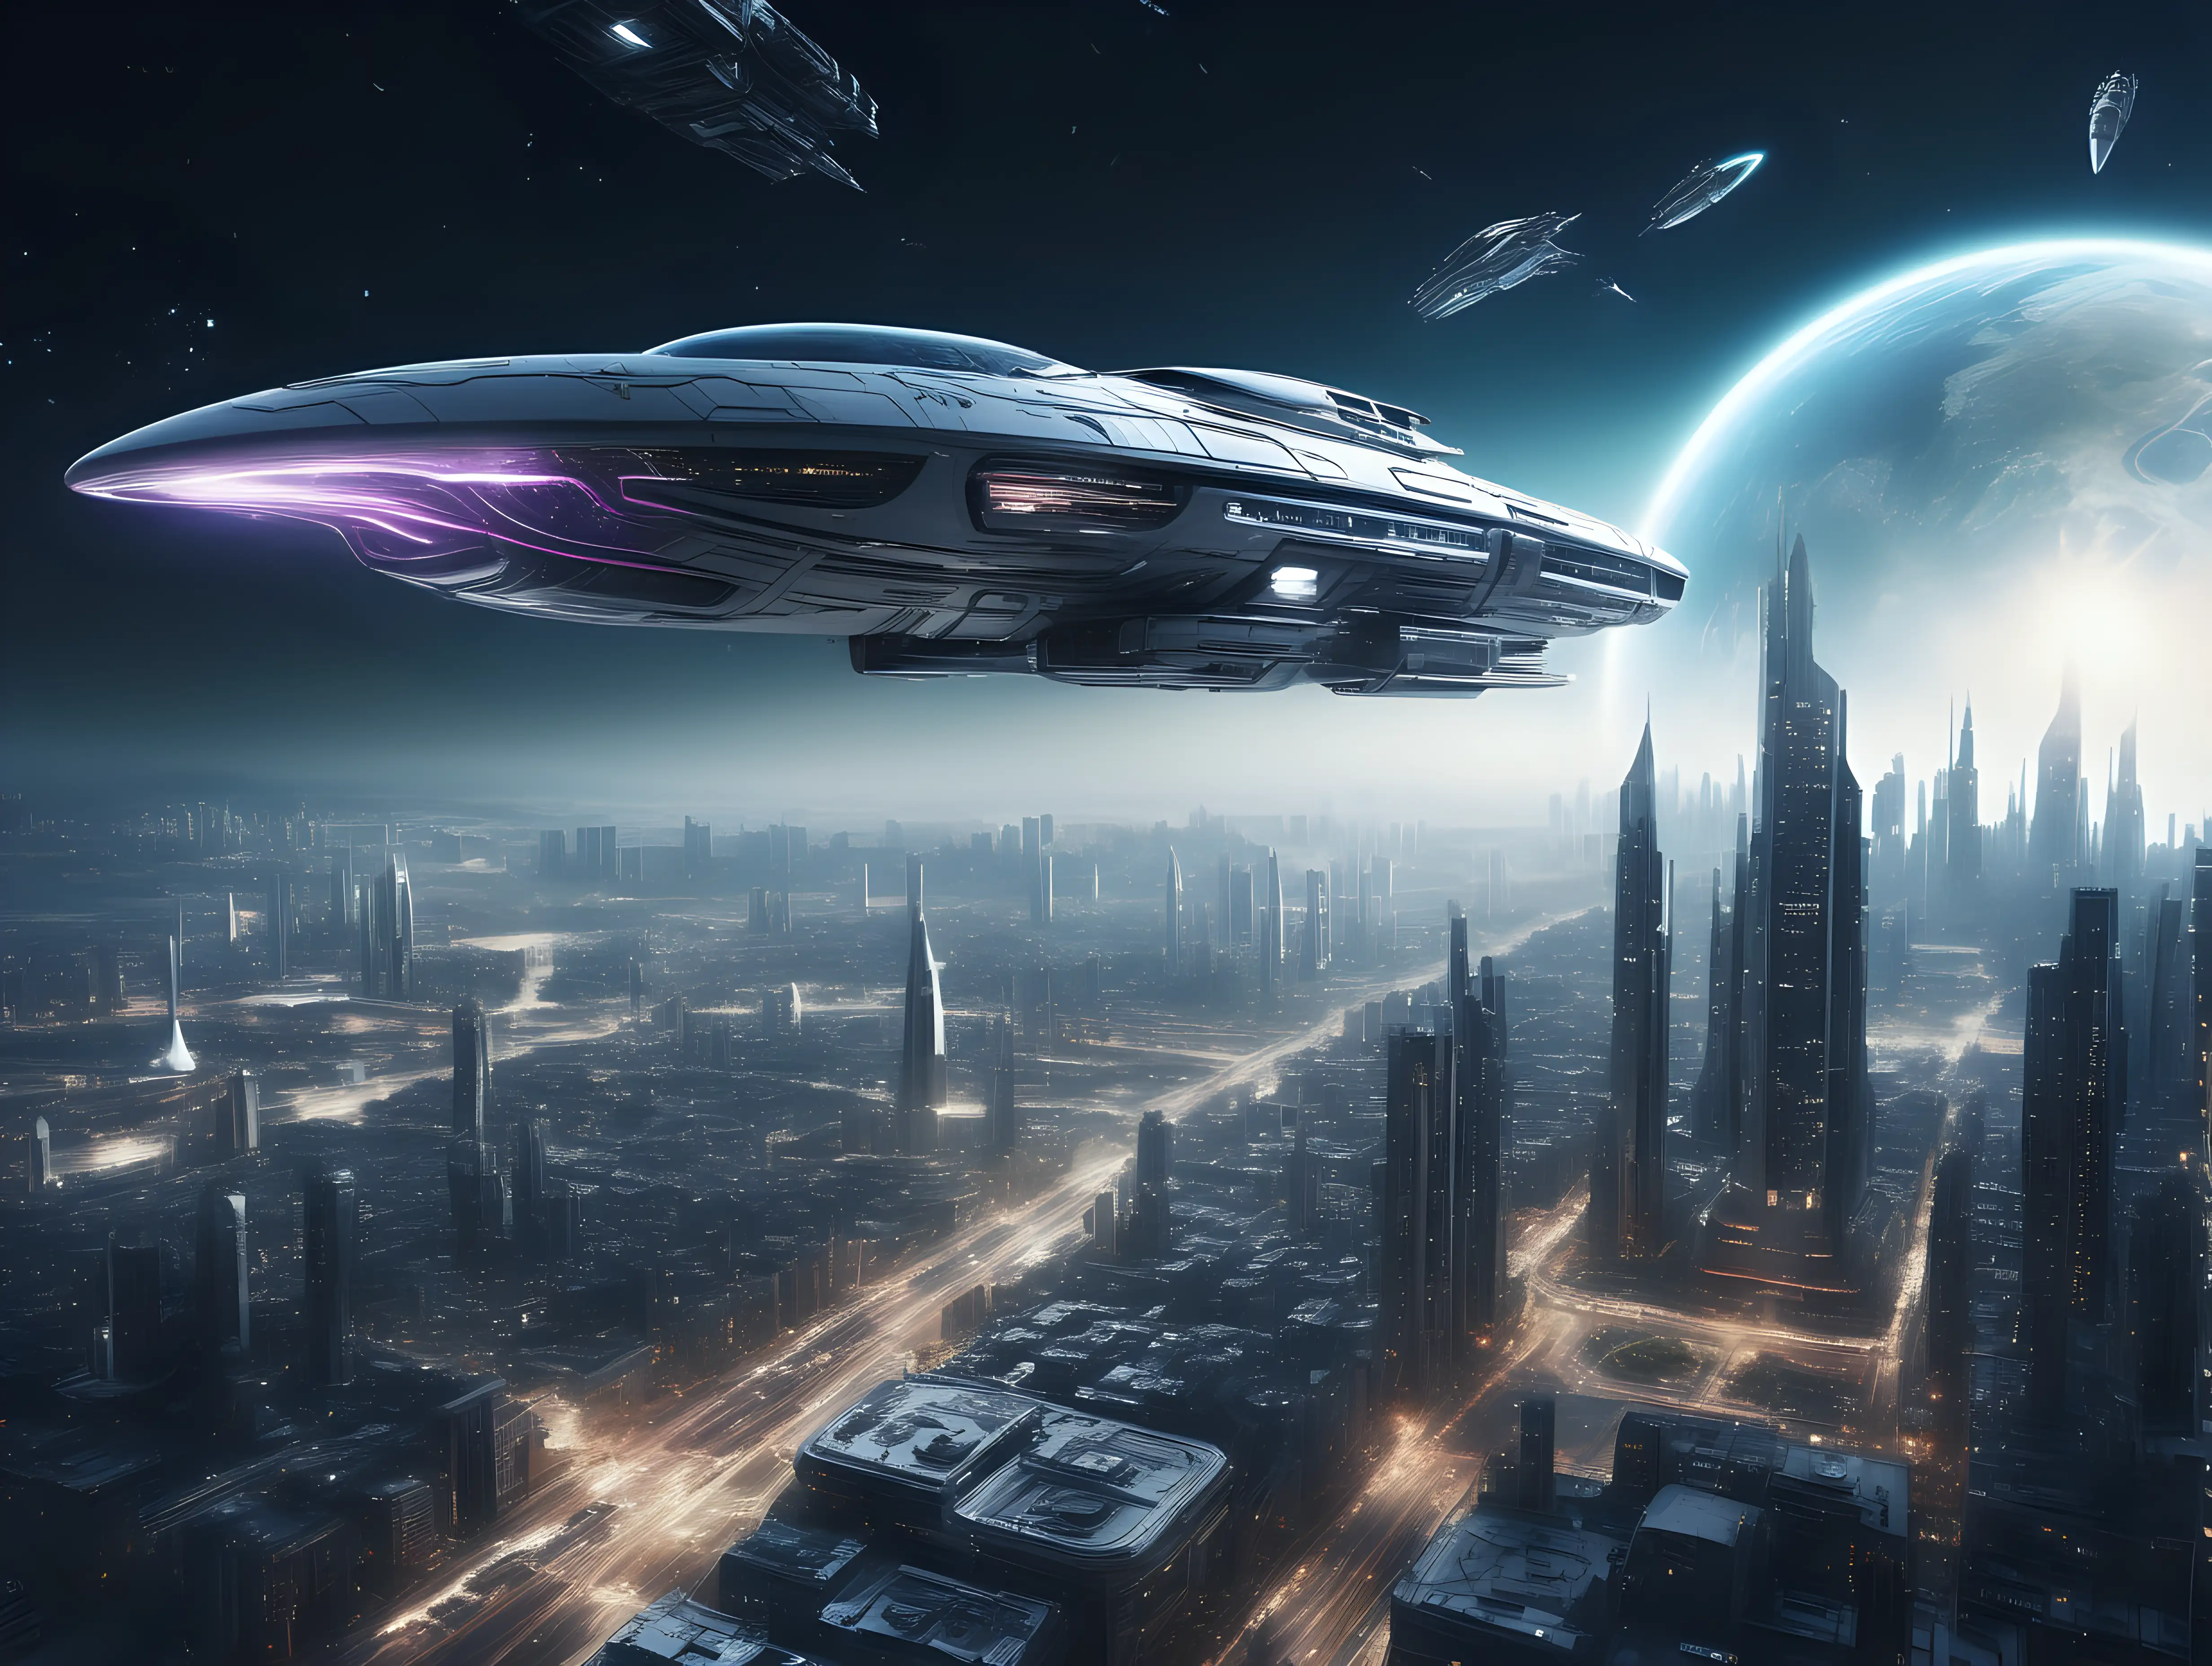 Futuristic Cityscape with Hovering Spaceship Illuminated in Lights